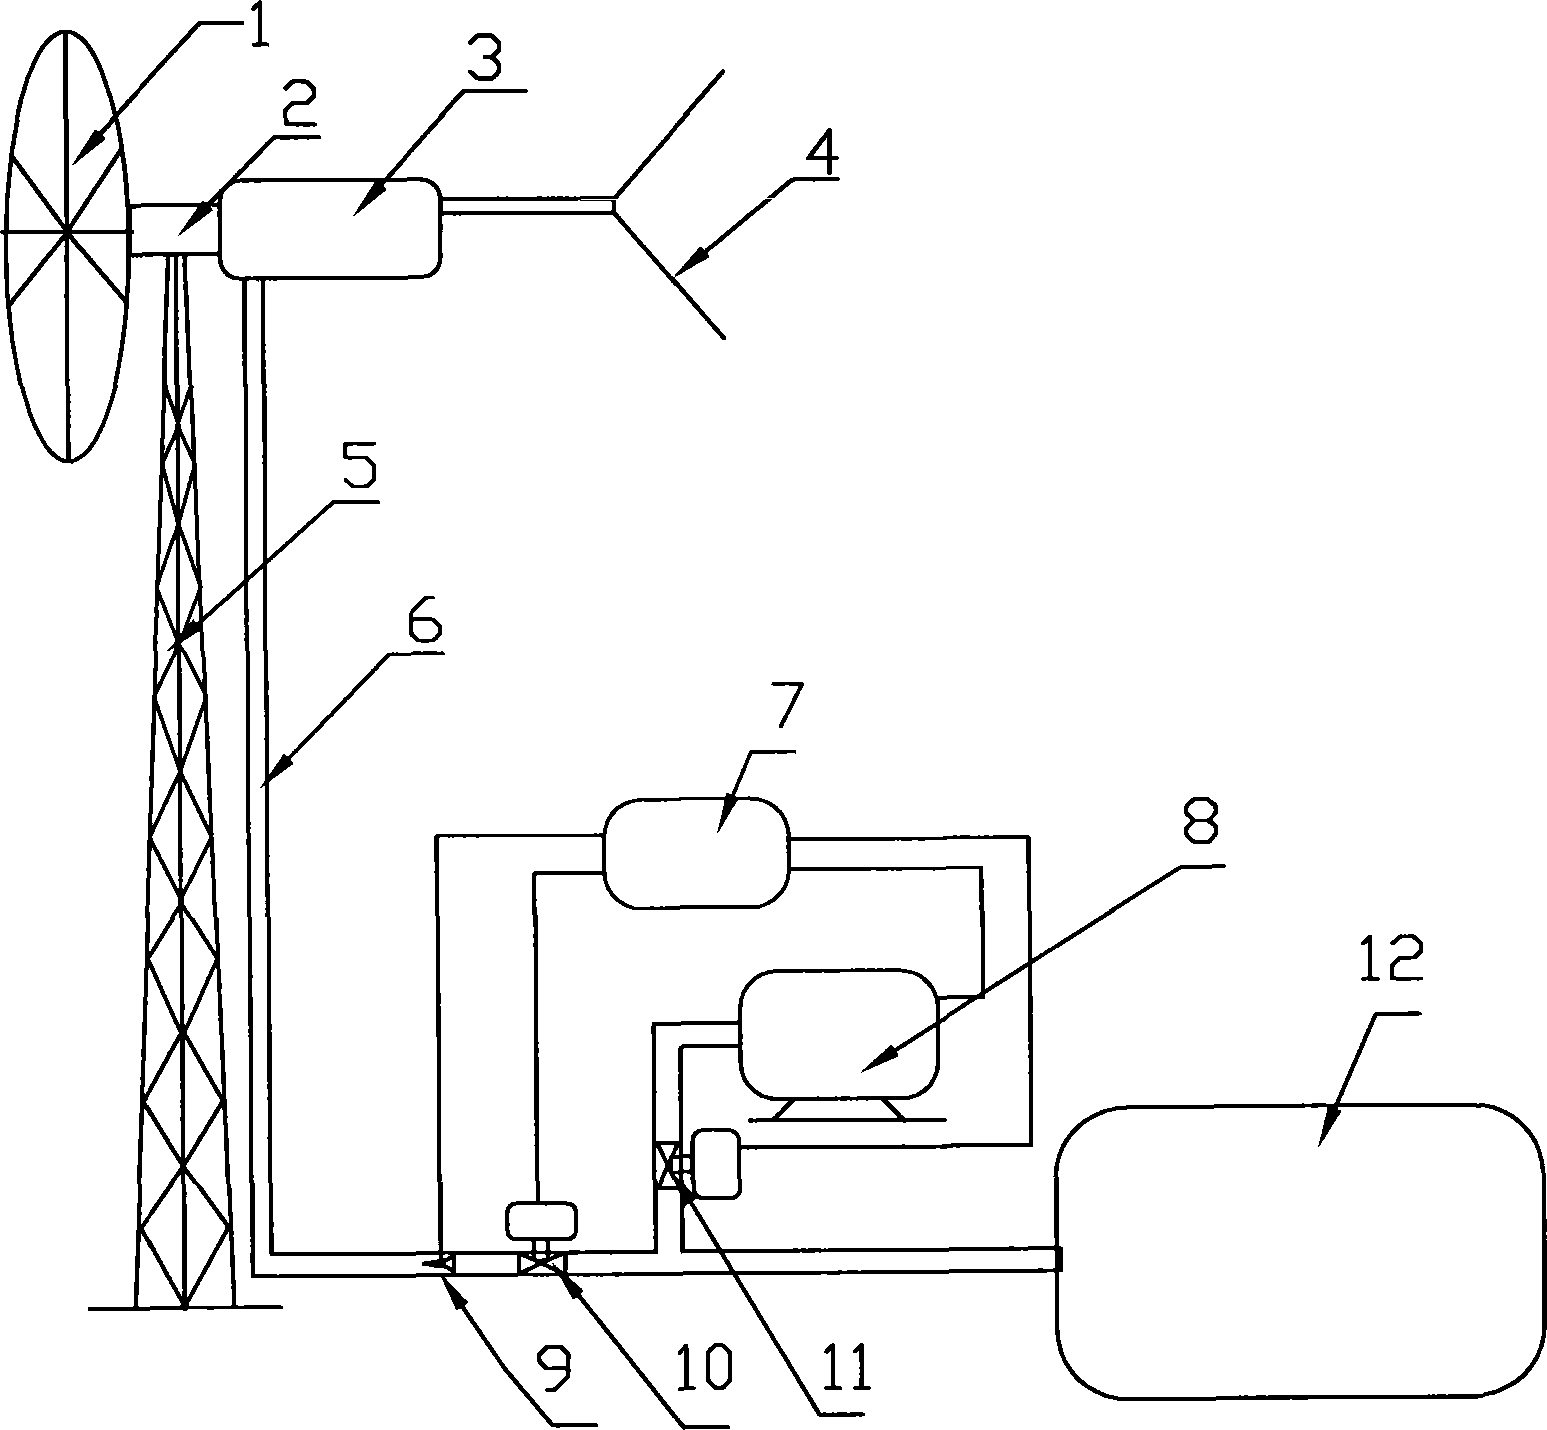 Air-electricity linkage aerating device